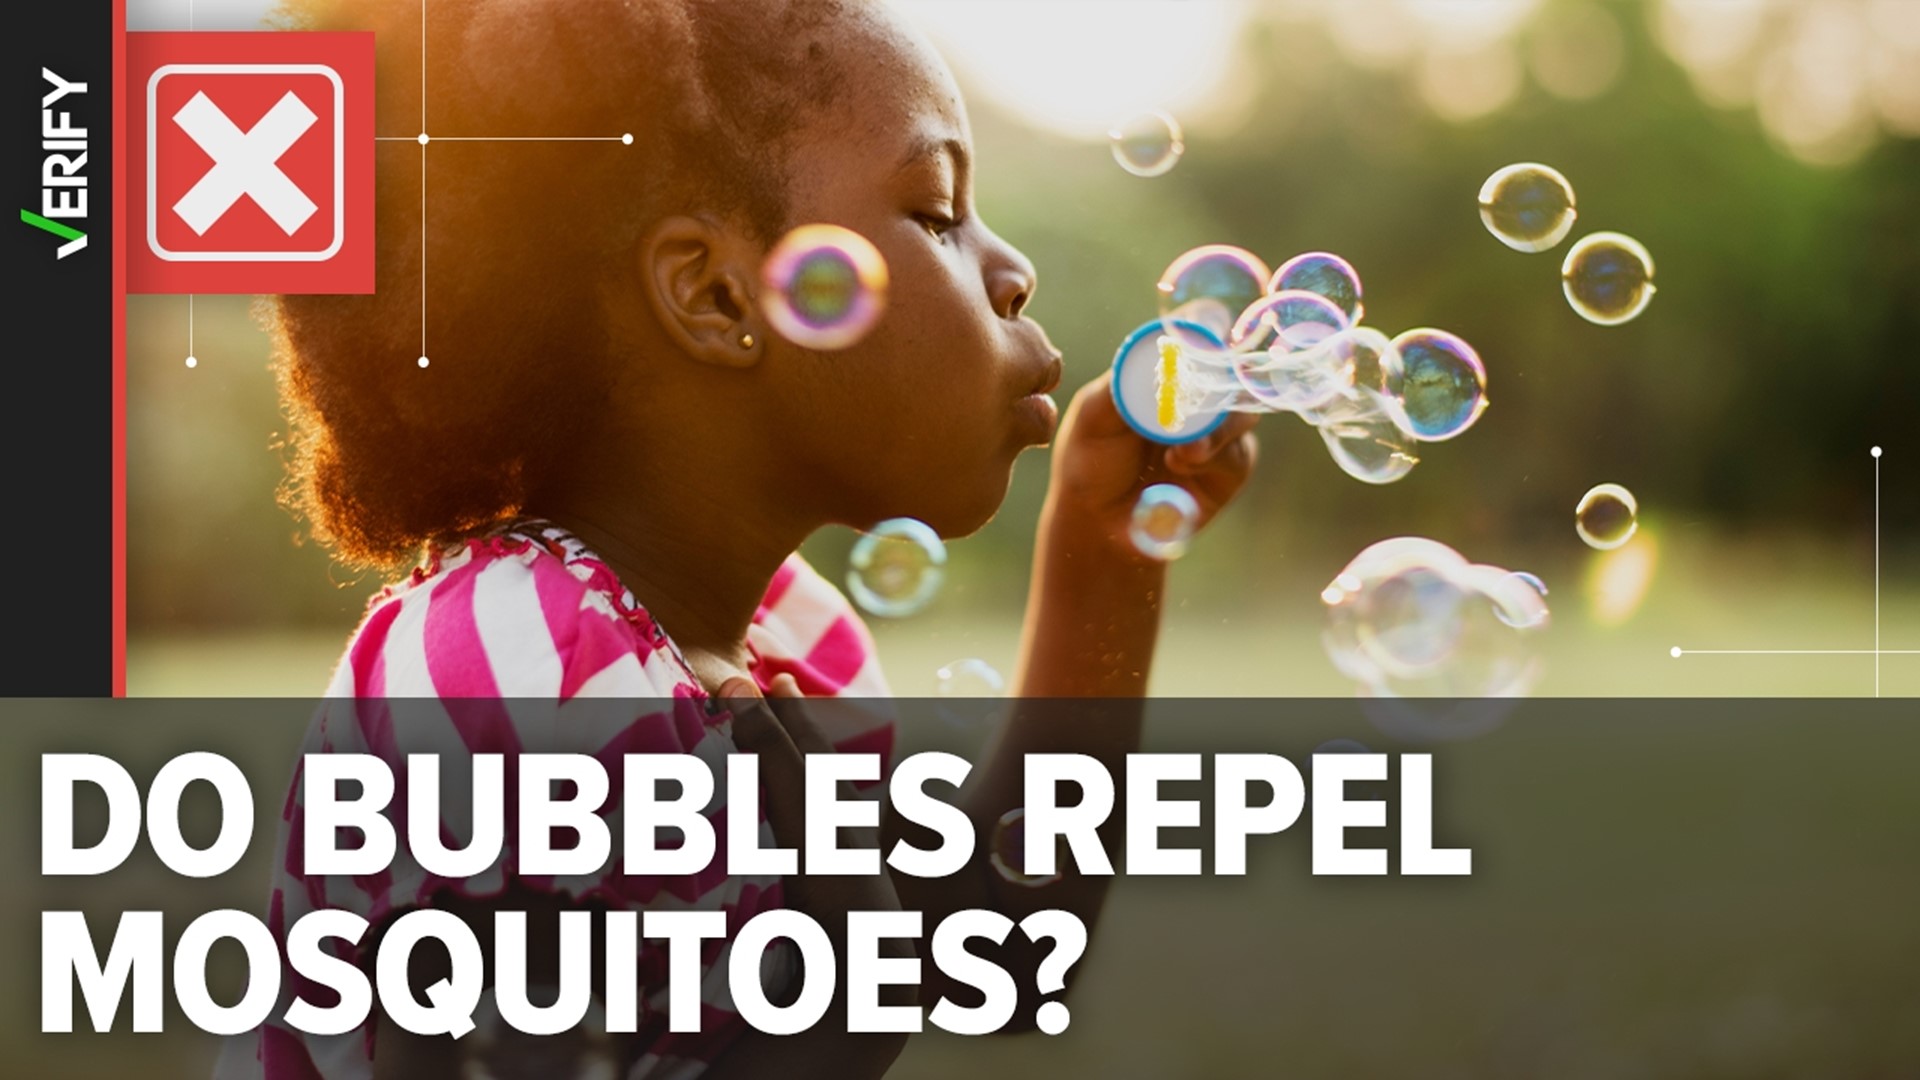 Contrary to viral social media posts, soapy bubbles don’t work as insect repellent or pesticide.